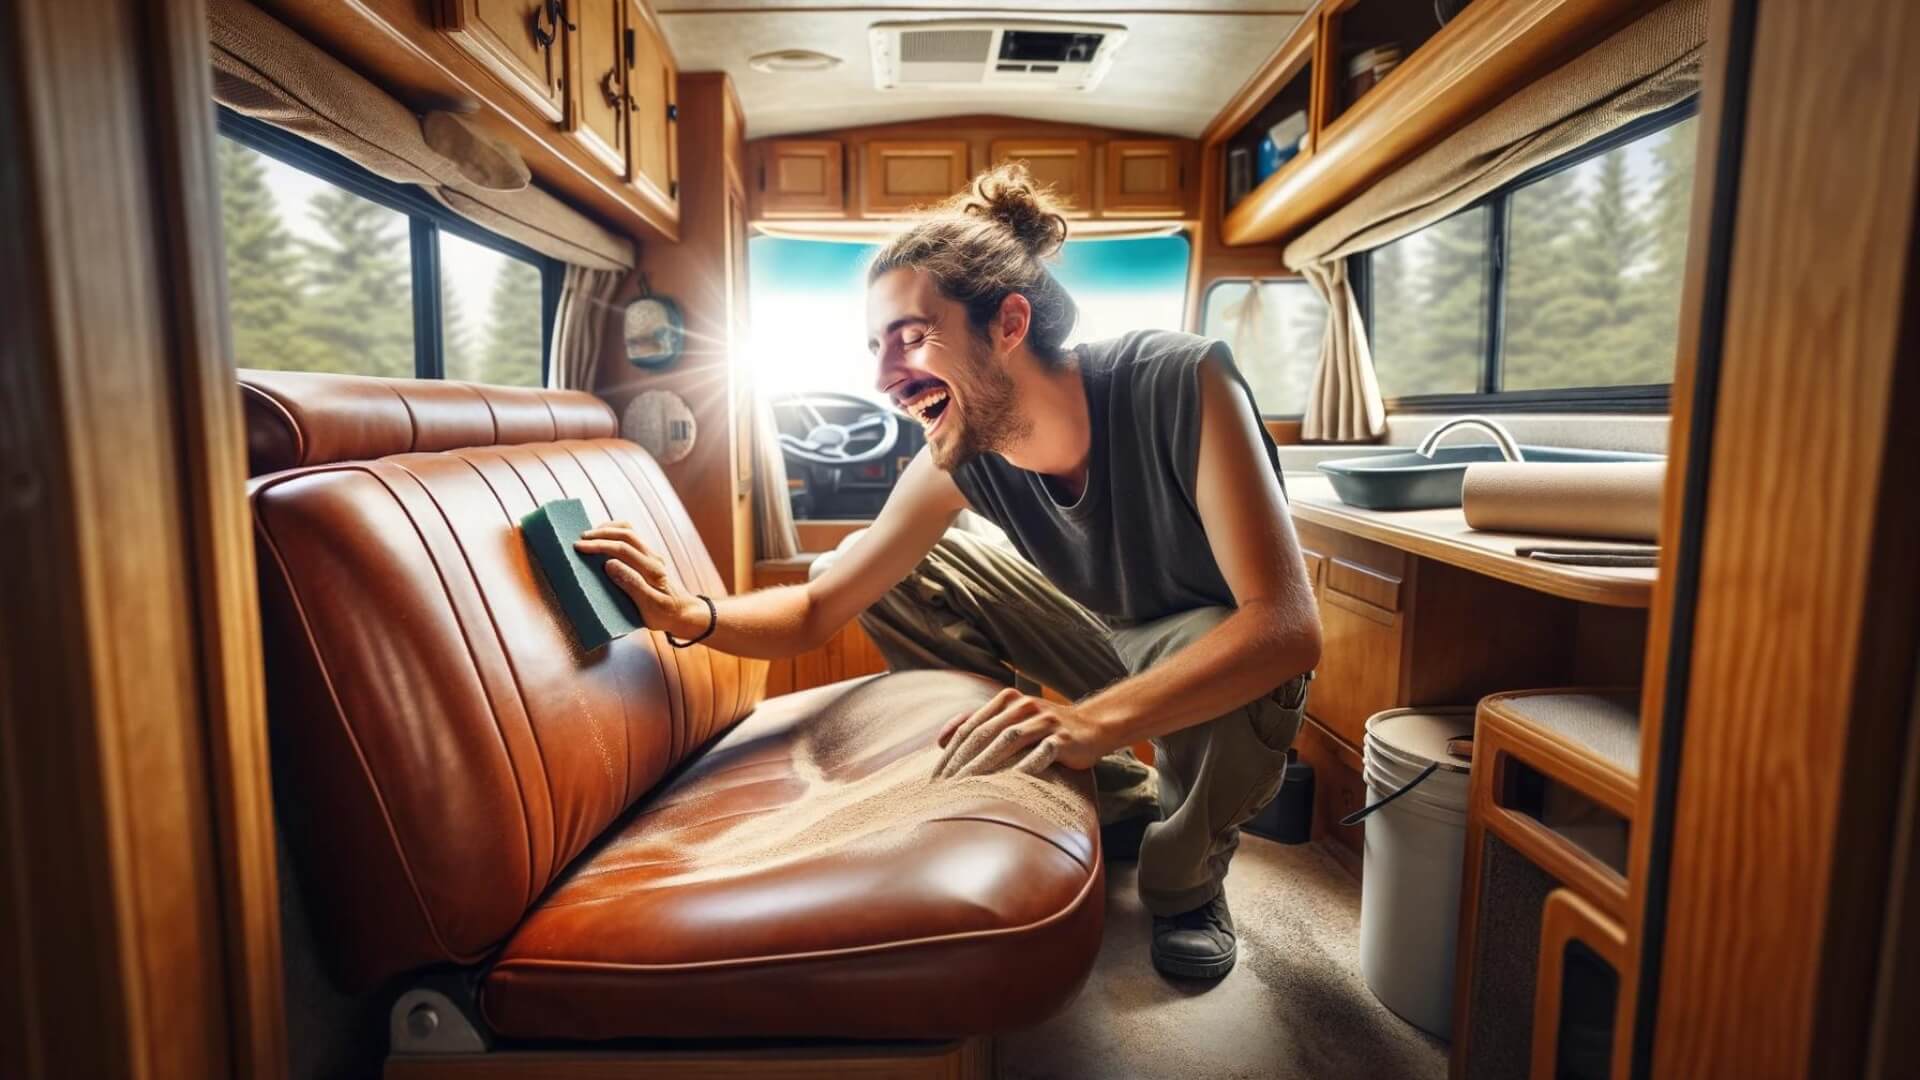 an oblivious hipster uses sandpaper on the lather interior of his vintage RV